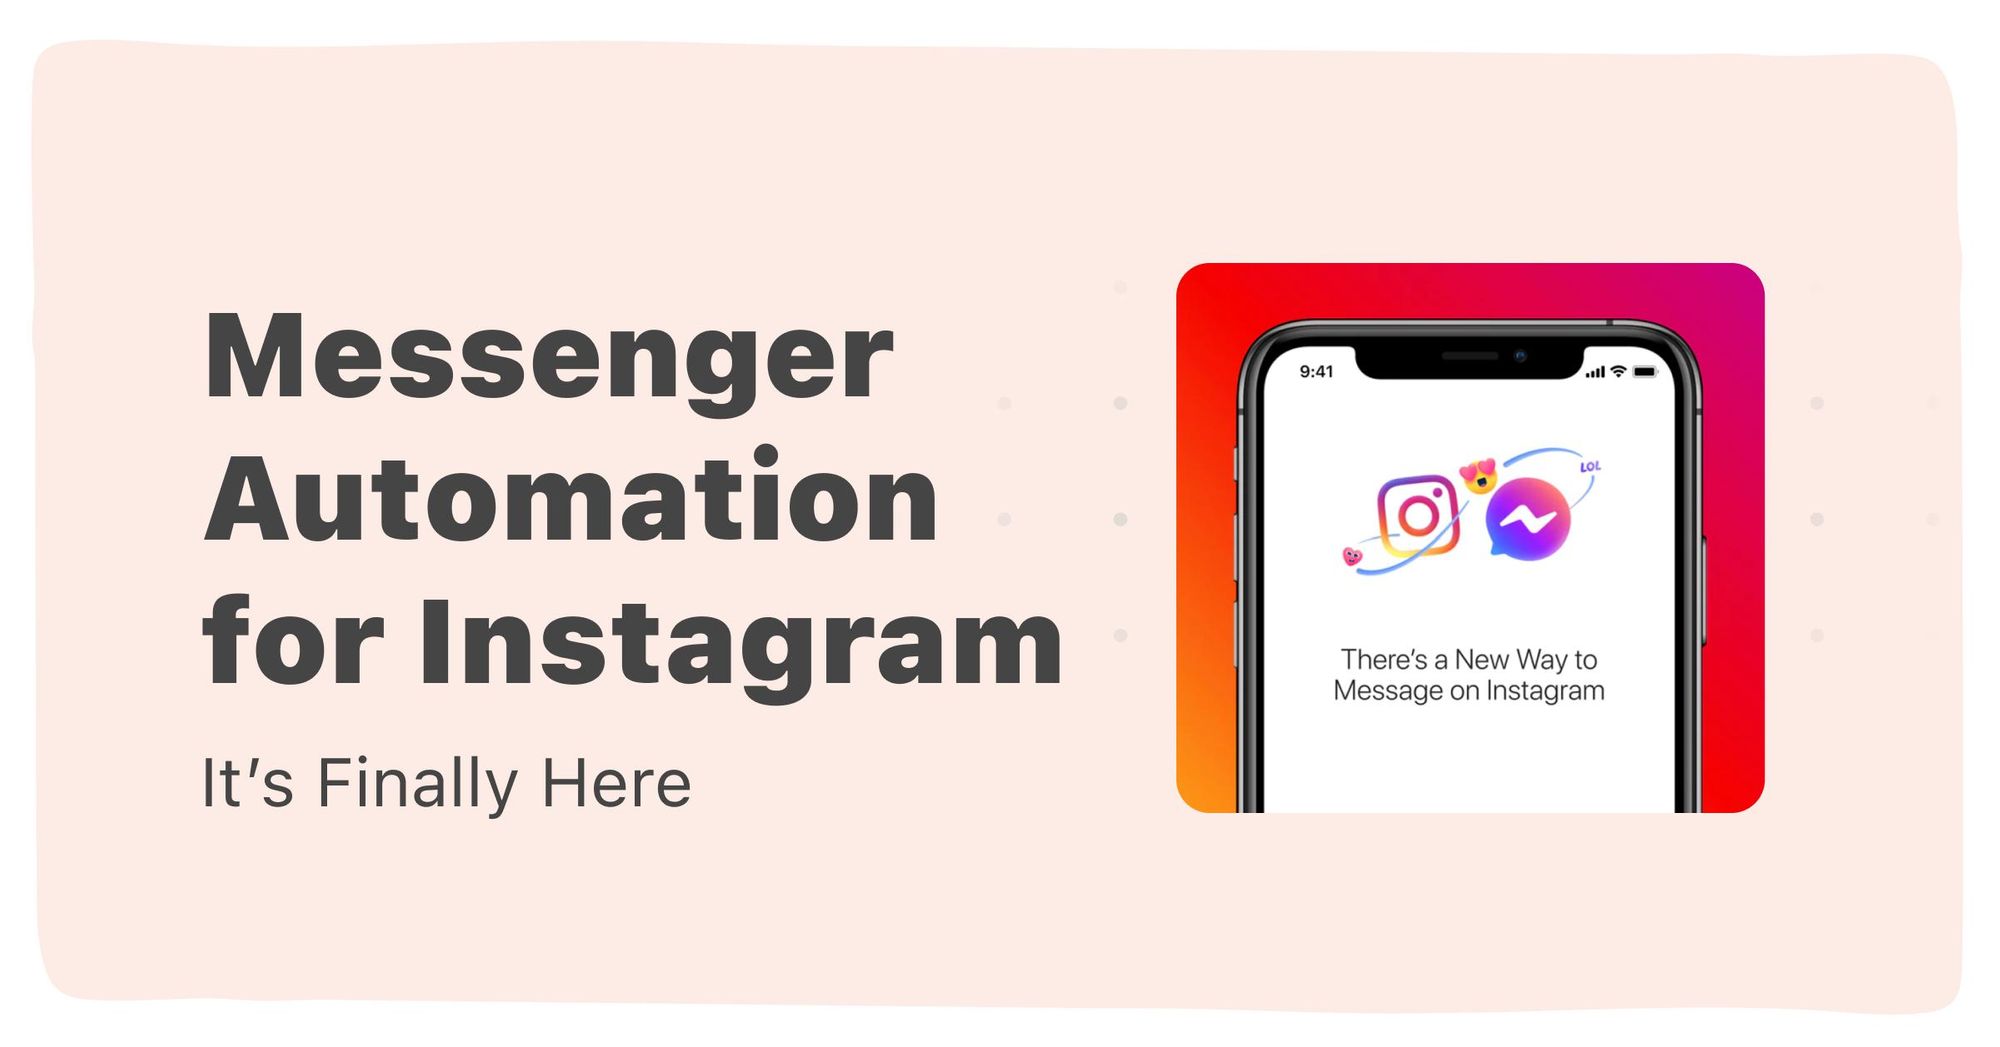 Brands on Instagram, especially D2C brands and creators can now use the same messaging automations Messenger already offered. Automations include mess